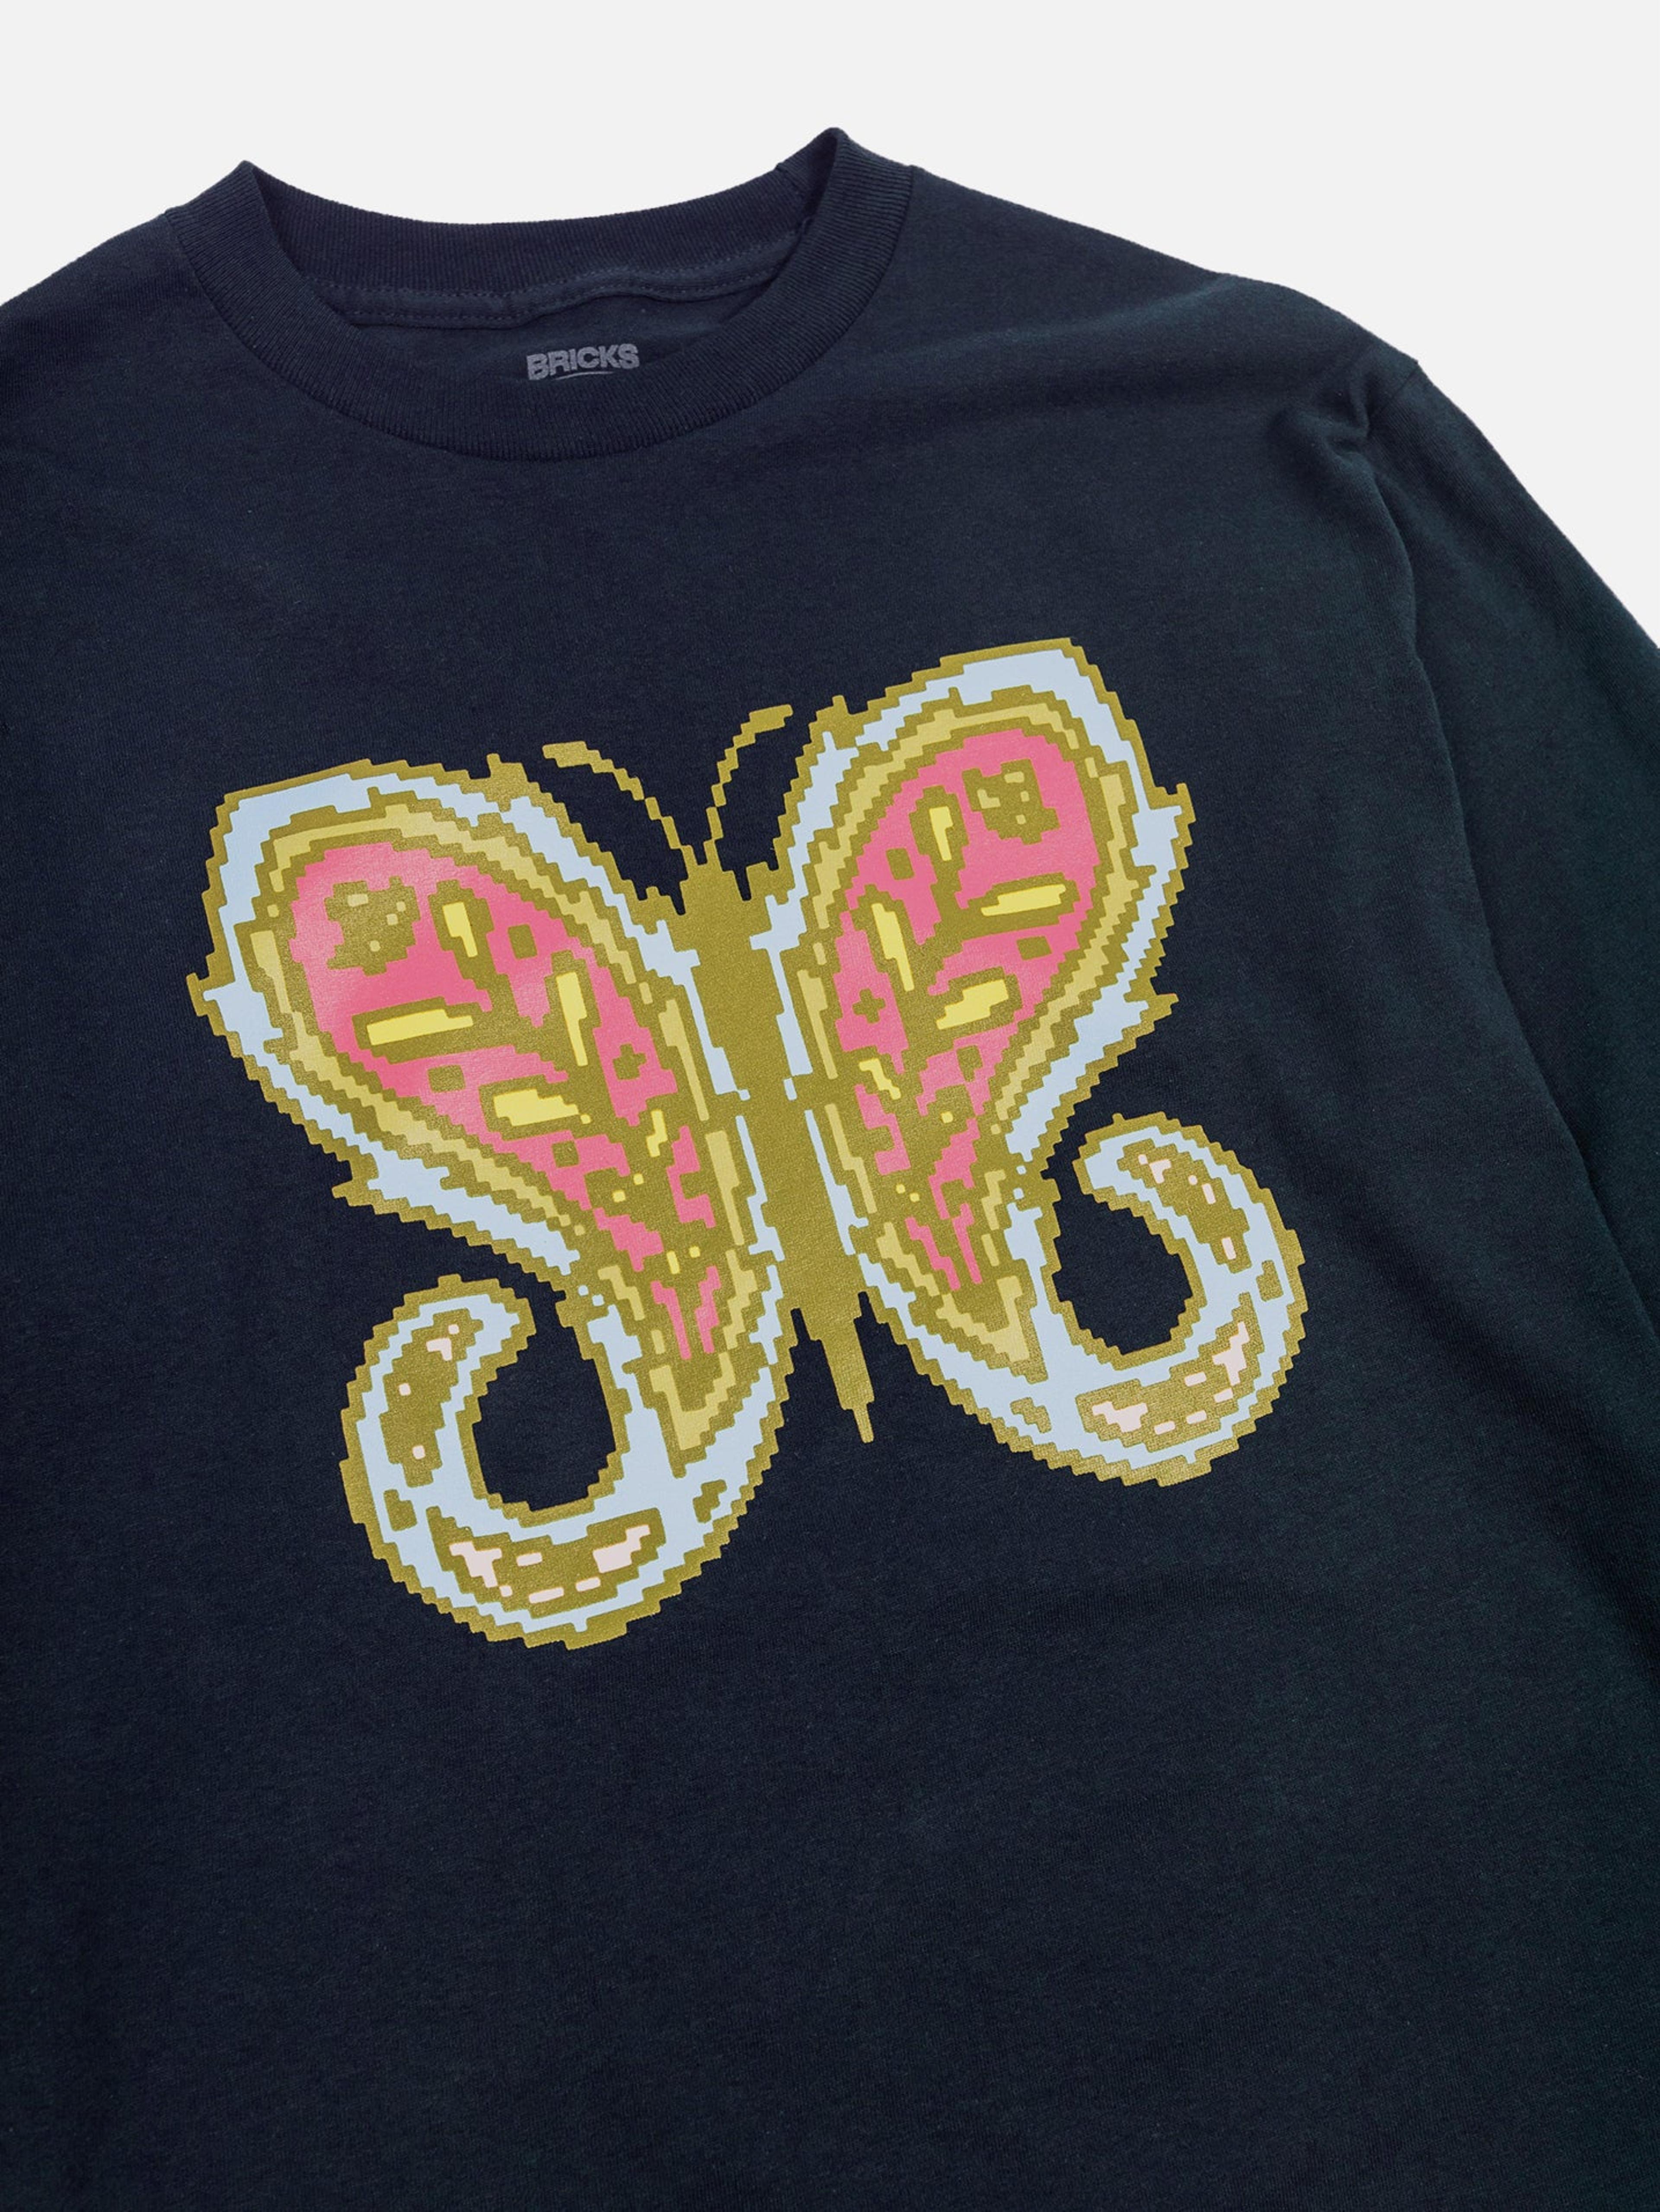 Alternate View 1 of Paisley Butterfly L/S Tee - Navy